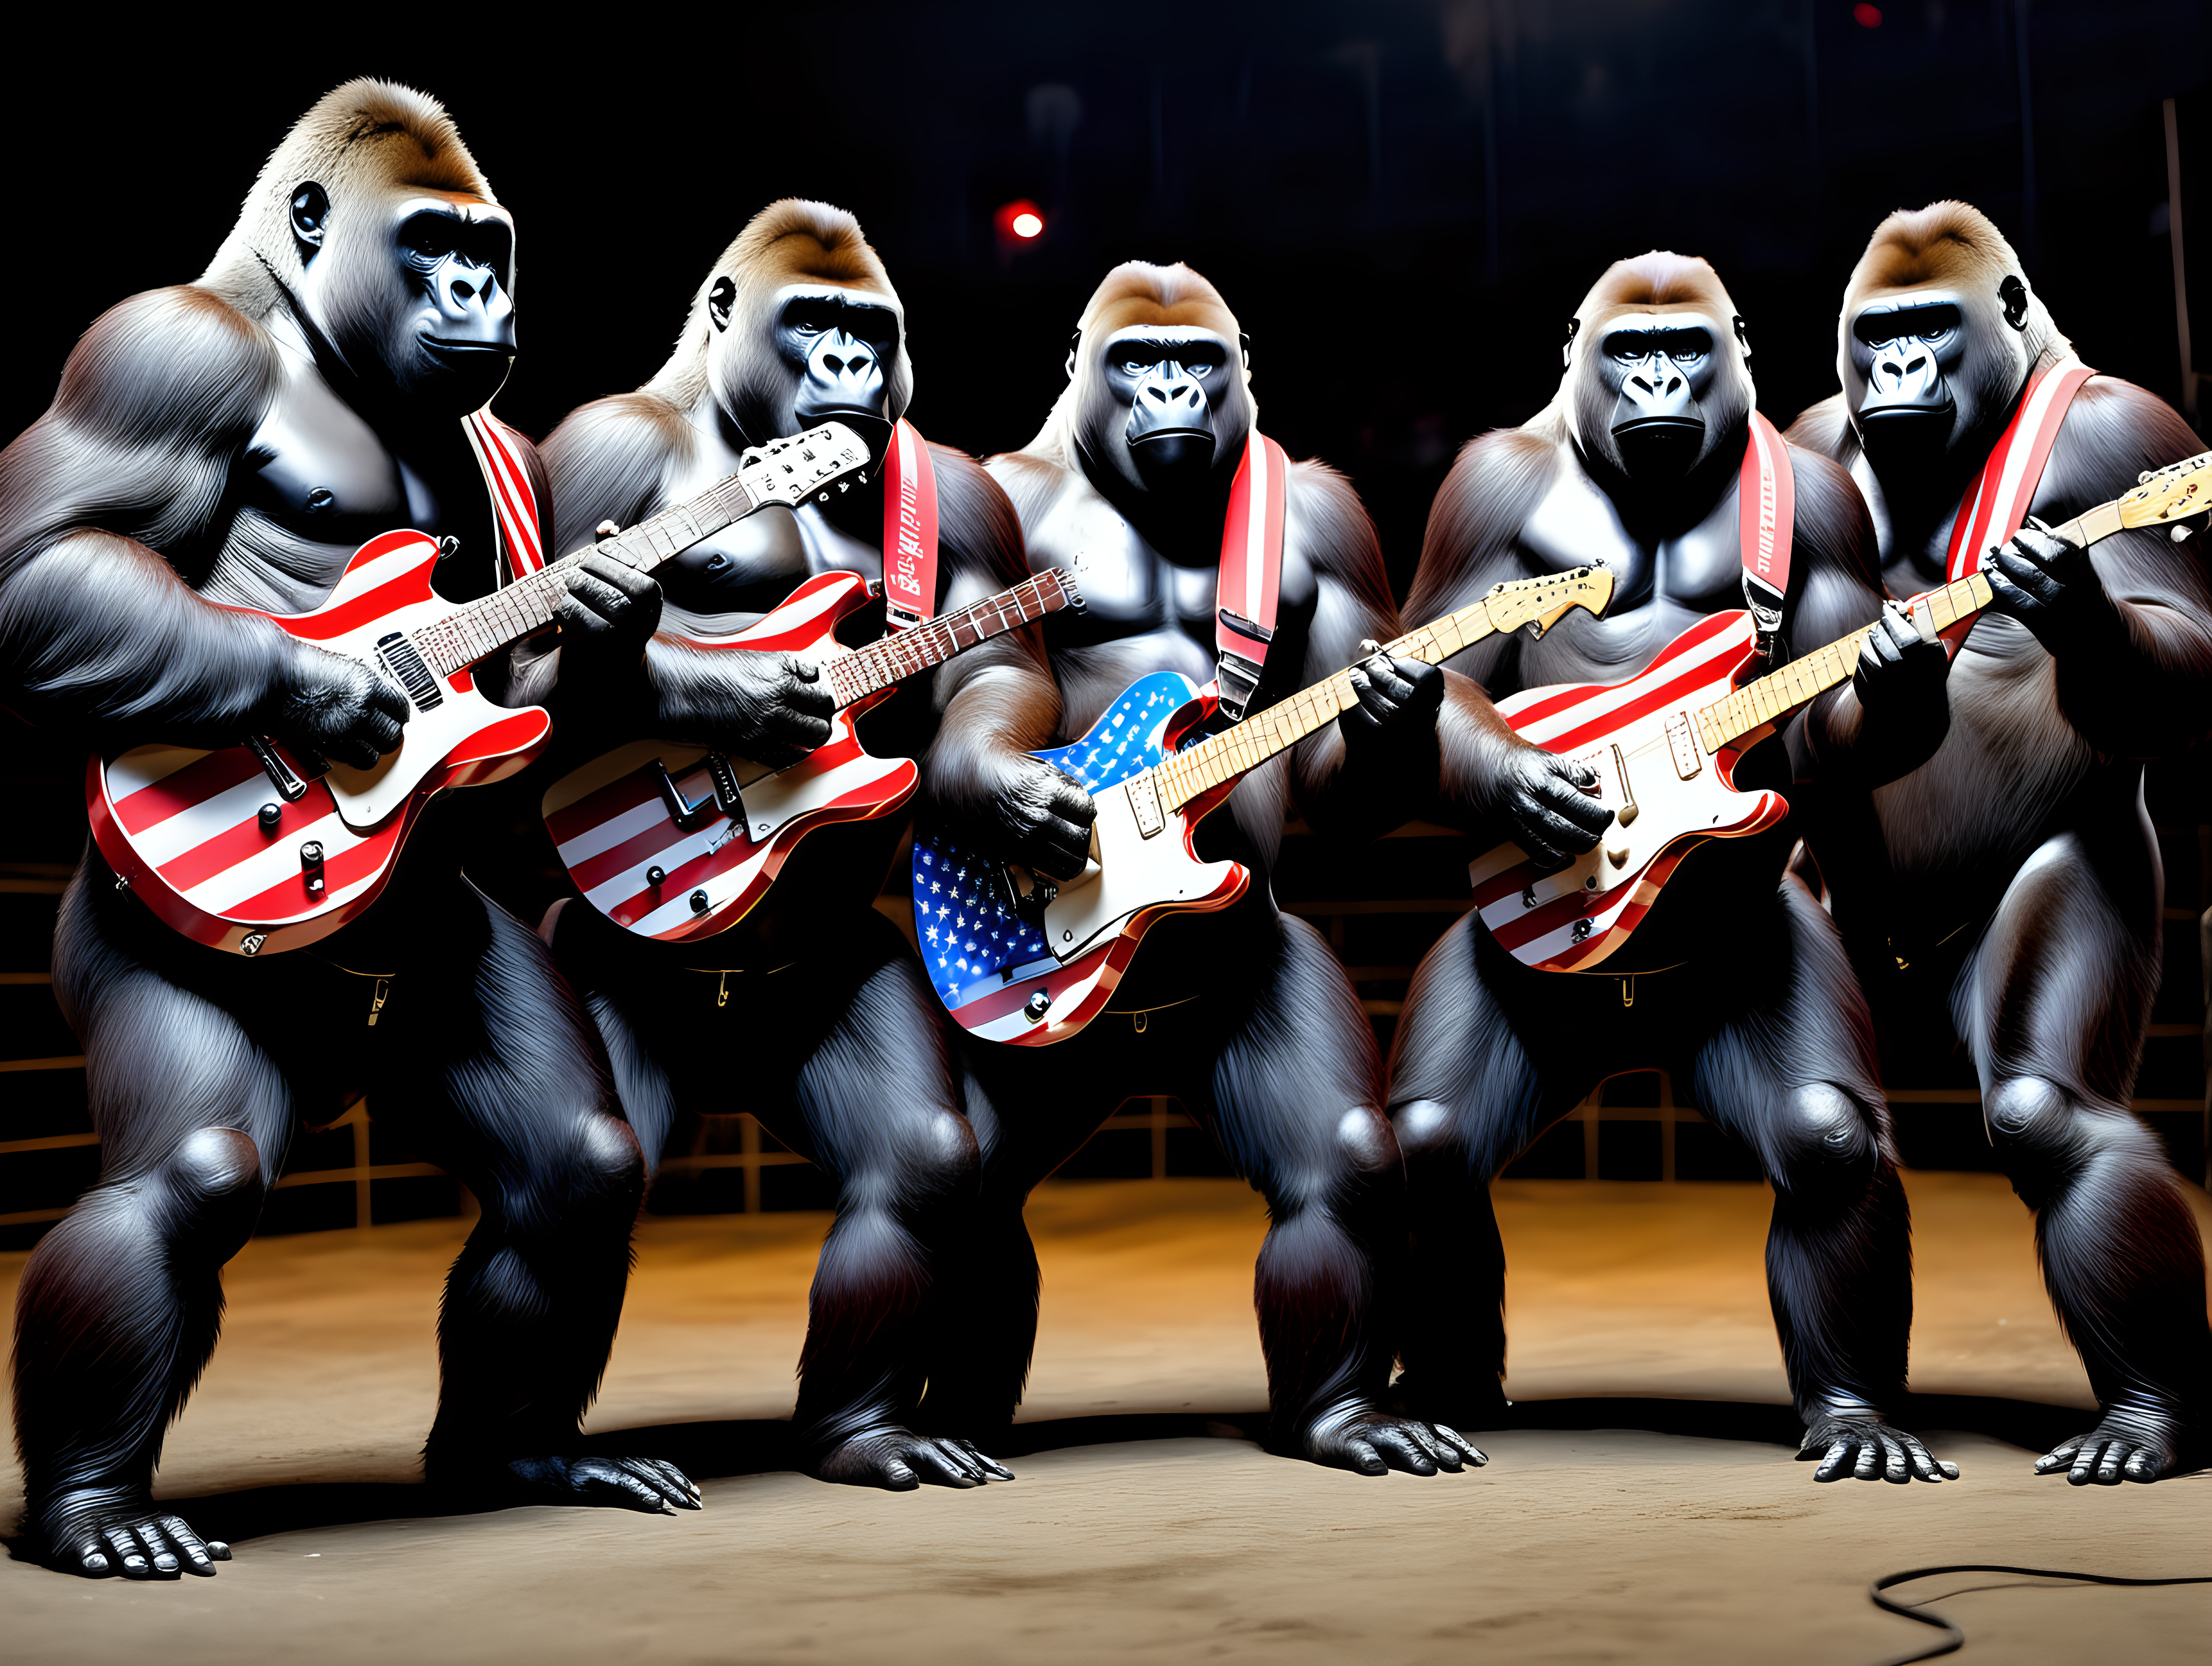 5 gorillas in trench coats playing stars and stripes guitars in an arena at night